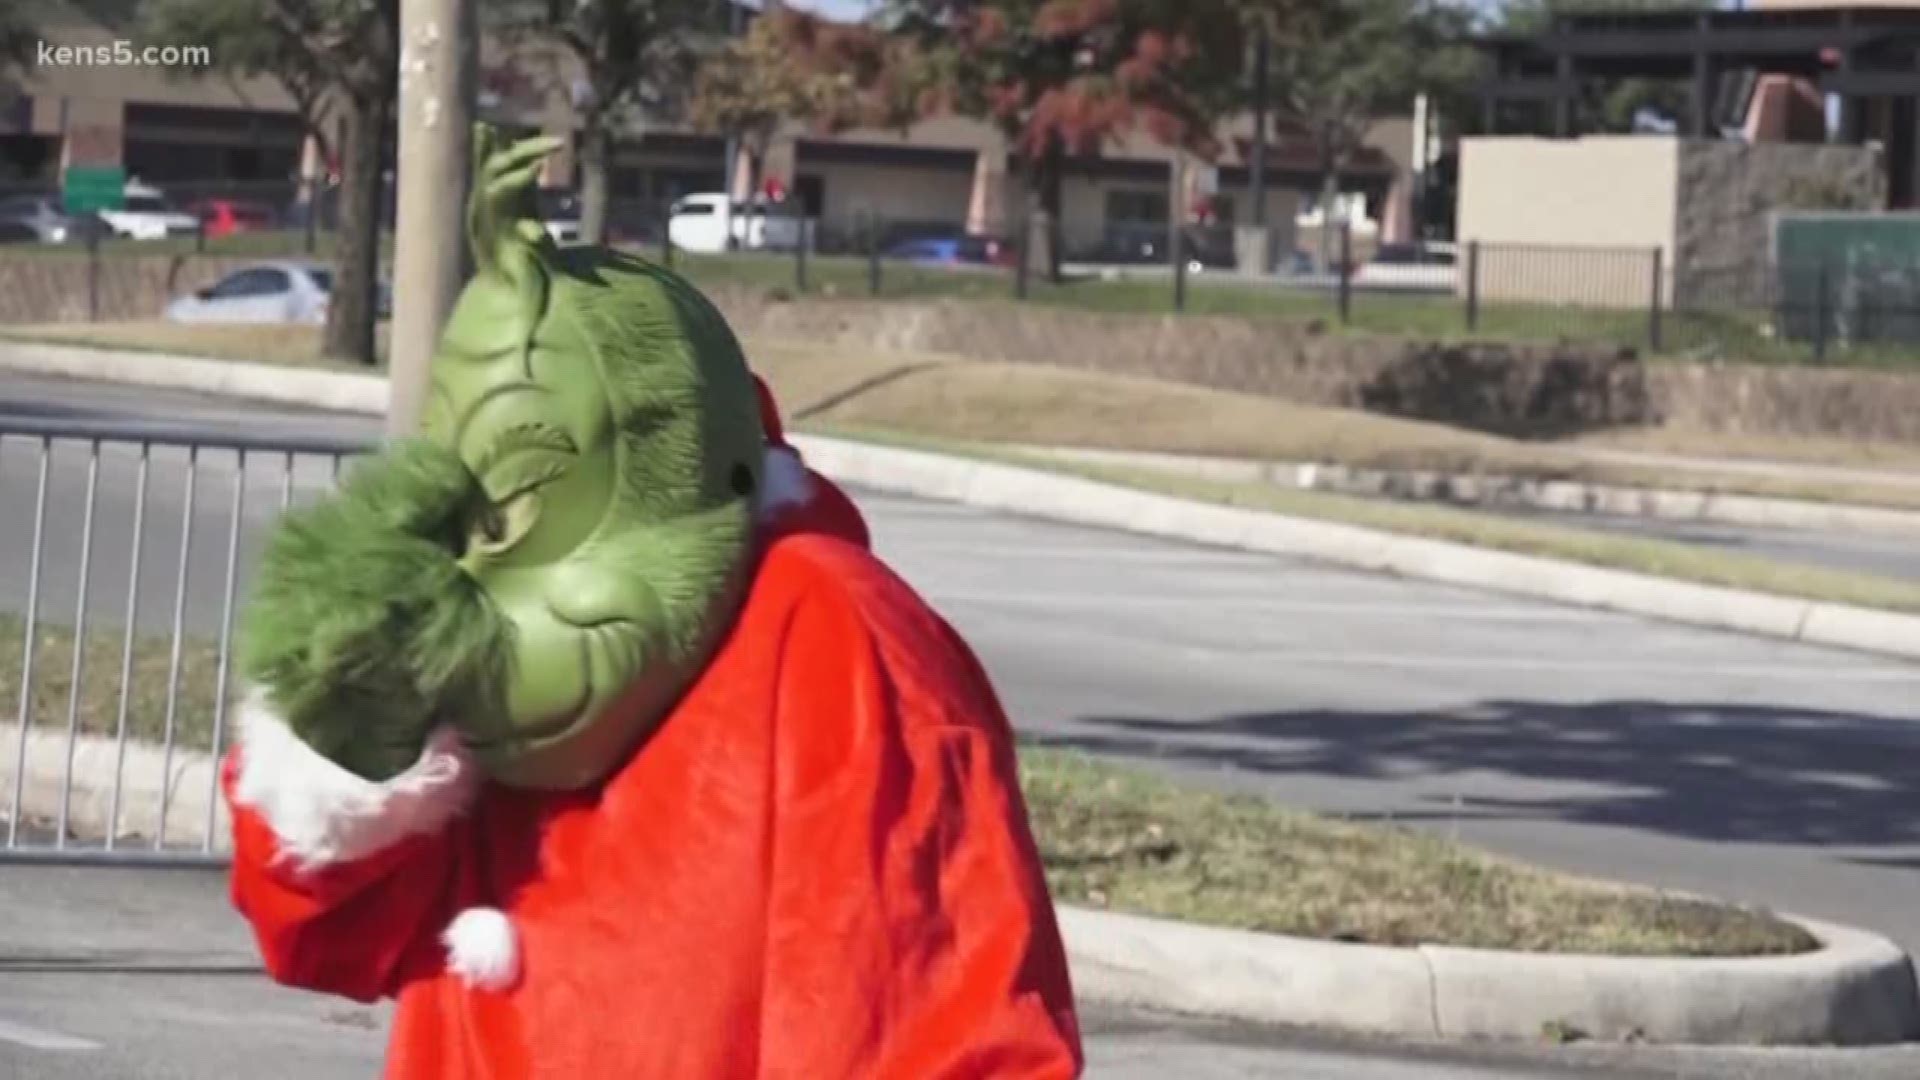 As the Christmas creep inches earlier than ever, police want to keep stores "Grinch-Free Zones." Eyewitness News reporter Erica Zucco explains.